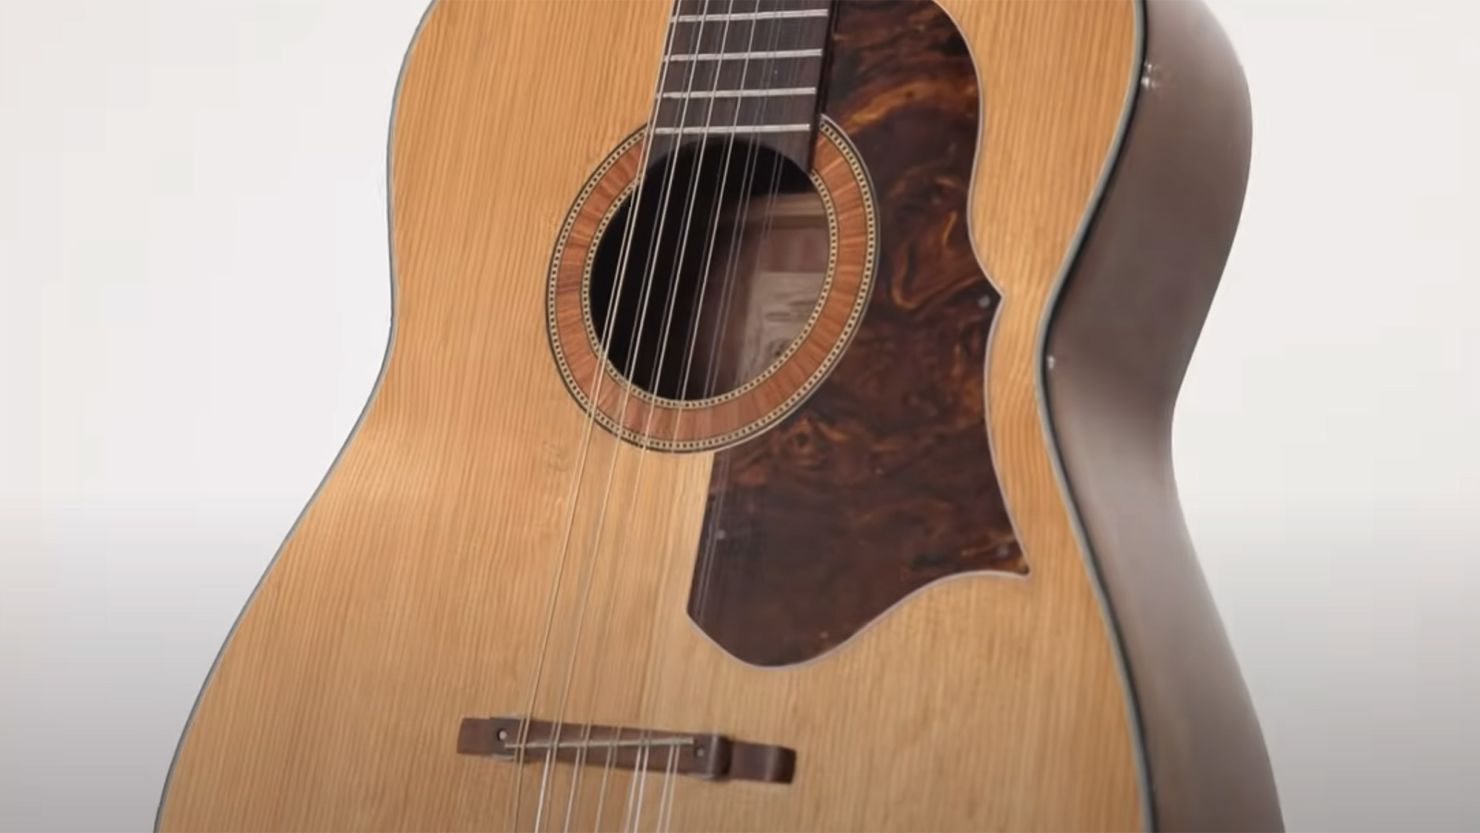 The 12-string guitar was made by German firm Framus.